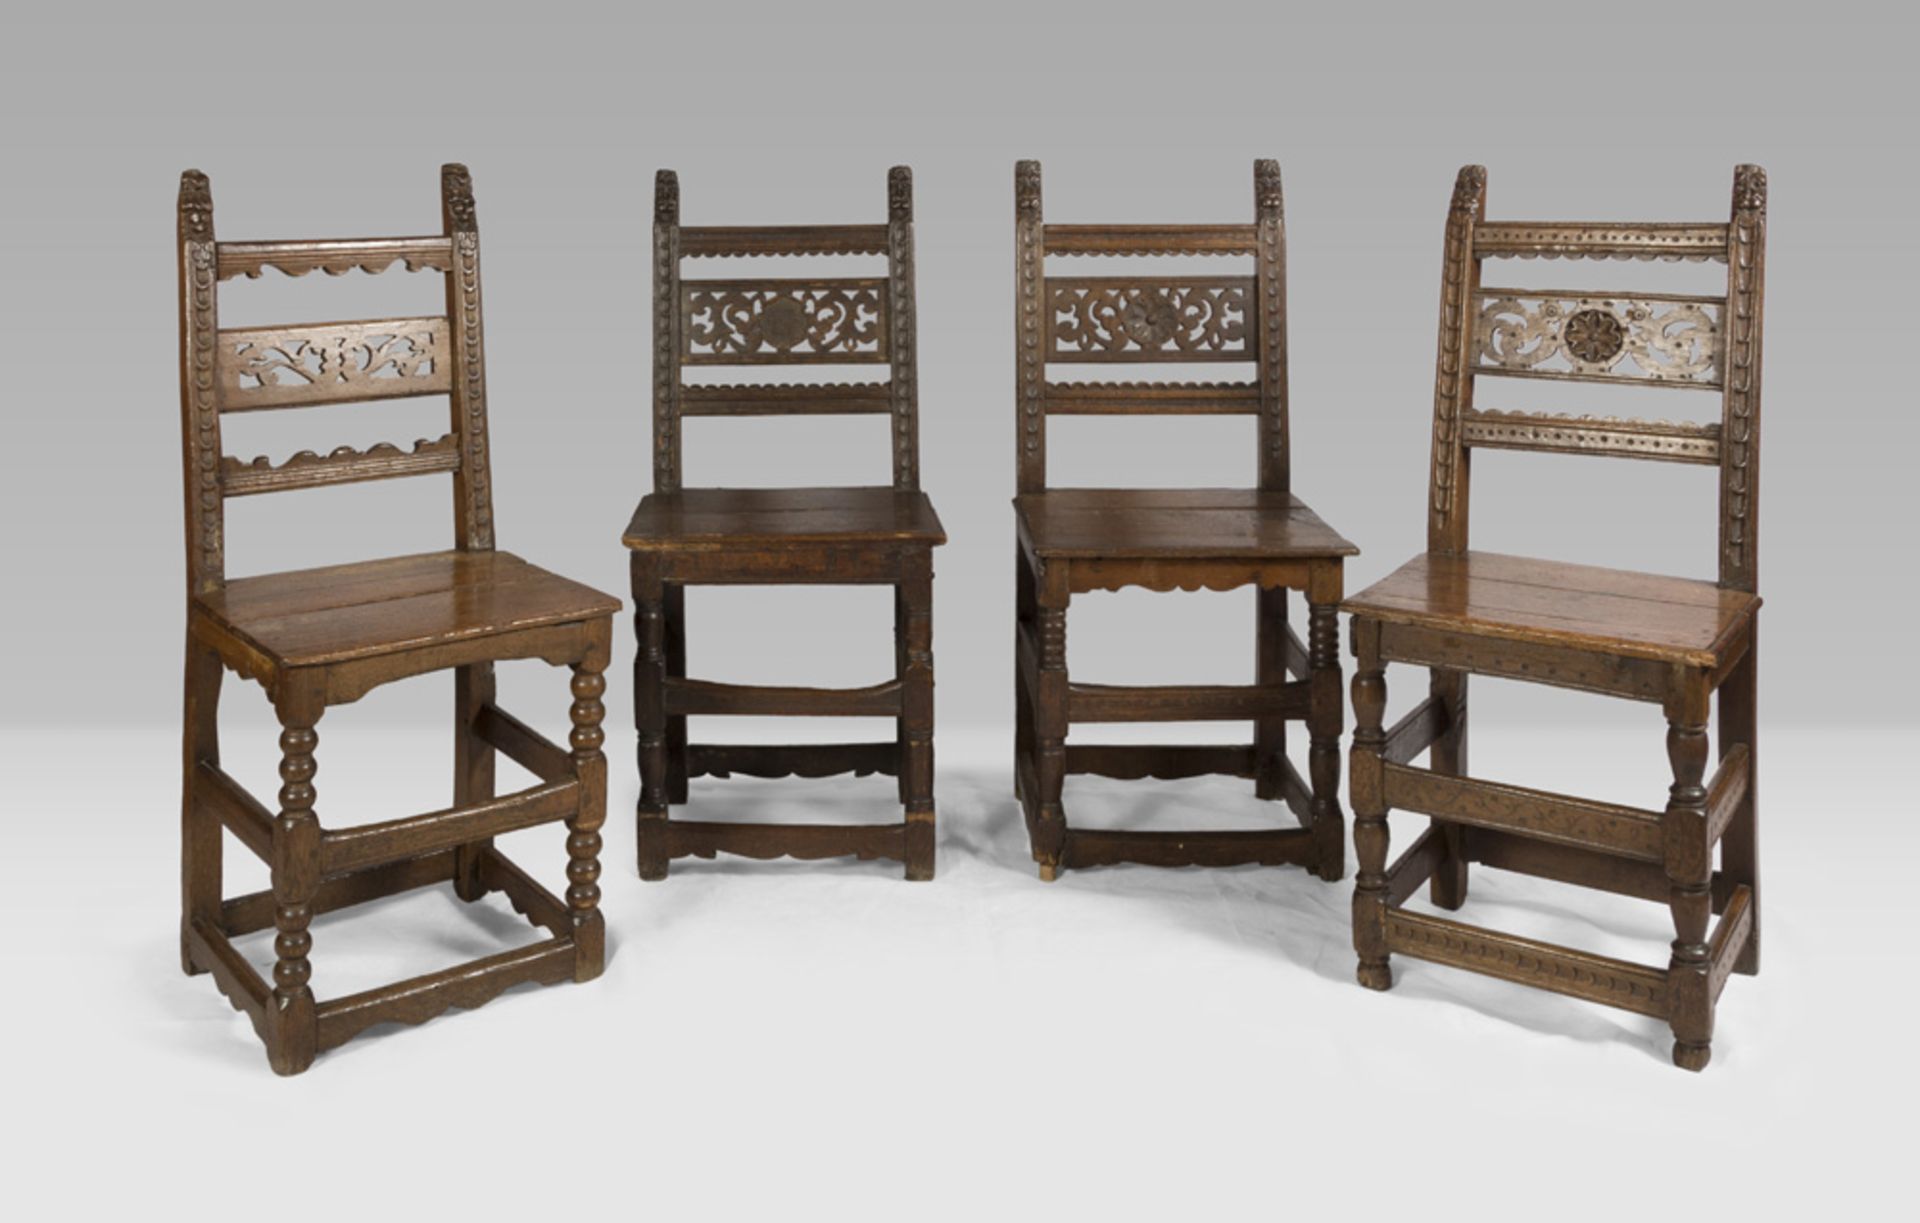 FOUR RARE WALNUT CHAIRS, ENGLAND, END 17TH CENTURY with splat backs pierced to floral motifs. Fish